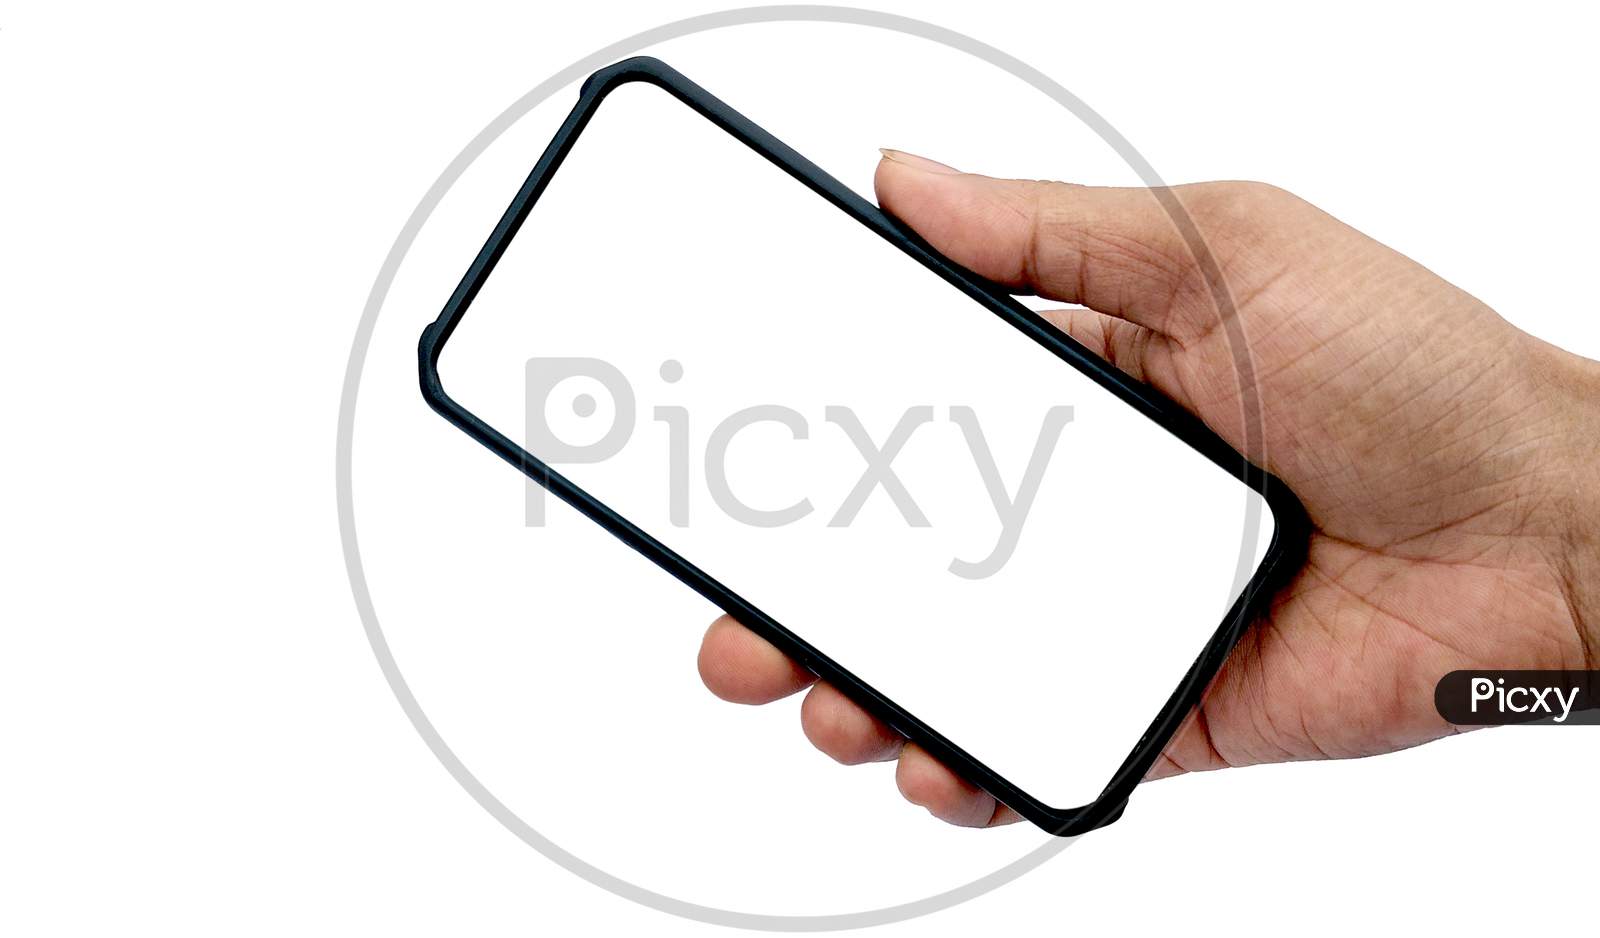 Man Holding Smartphone With Blank Screen On White Background, Closeup Of Hand. Space For Text